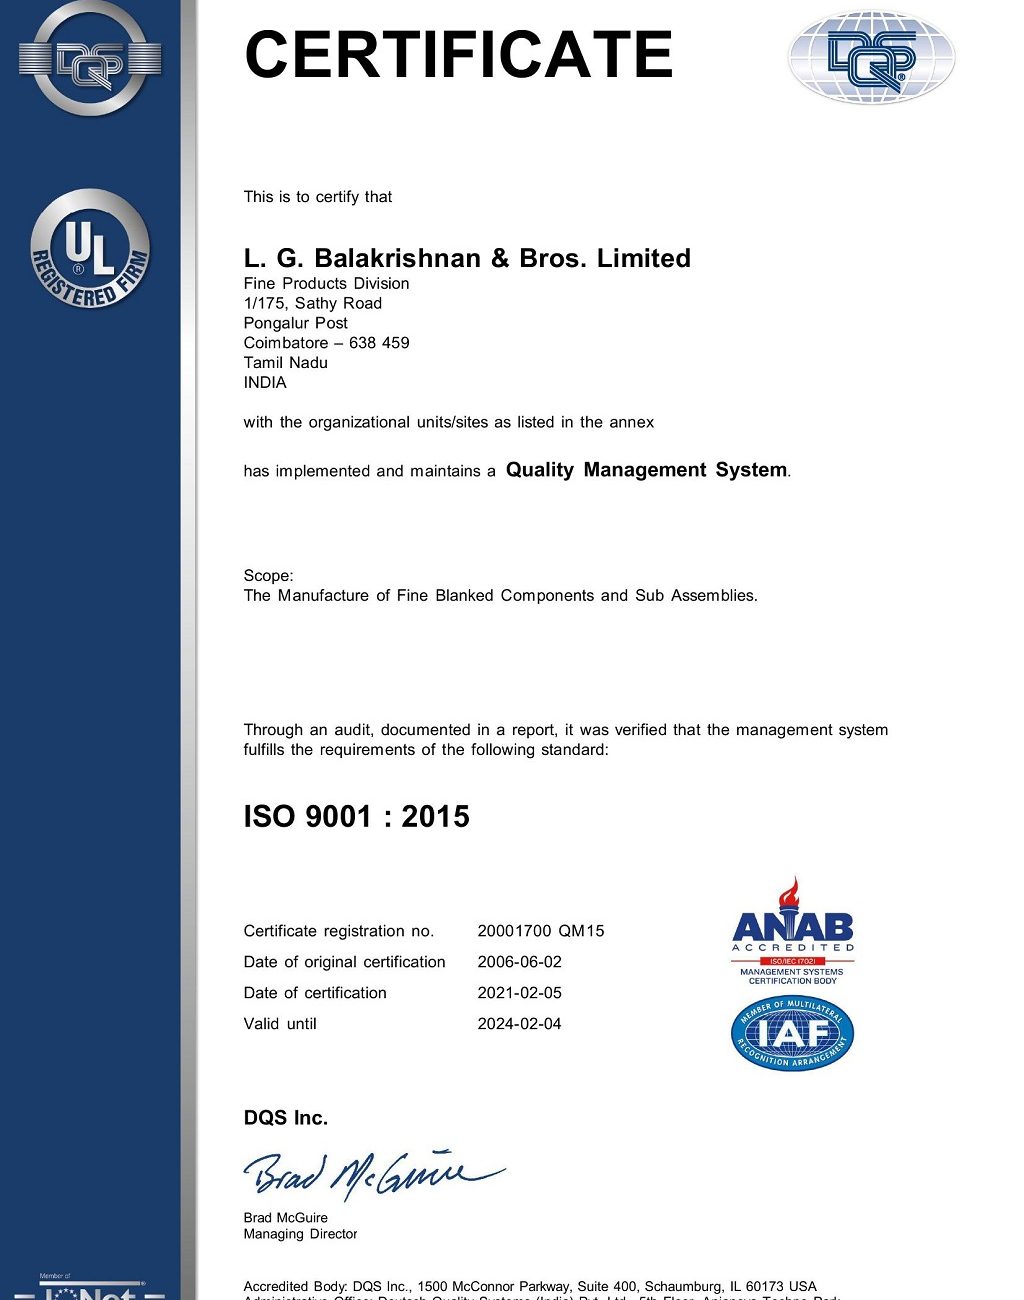 L.G.B FPD FPD2 PLANT ISO 9001 2015